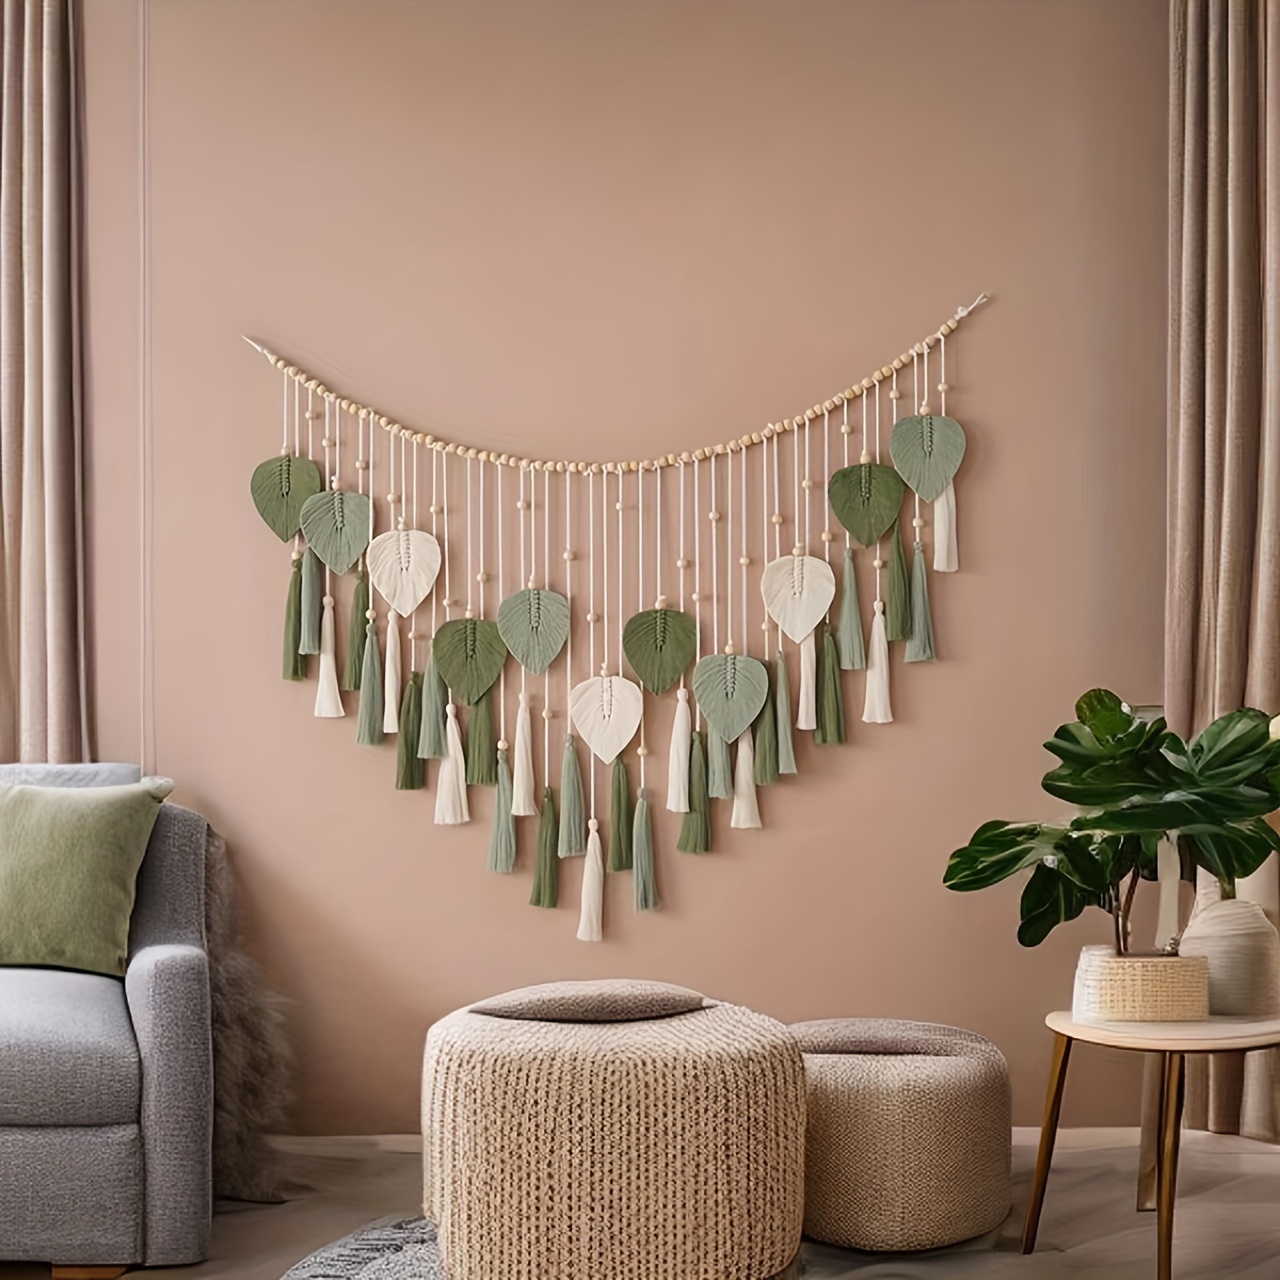 

Boho Style Green Leaf Garland Macrame Wall Art, Bohemian Home Decor, Mid-century Modern Living Room Wall Hanging, New Year Gift, No Feather, Polycotton Christmas Decor Without Electricity